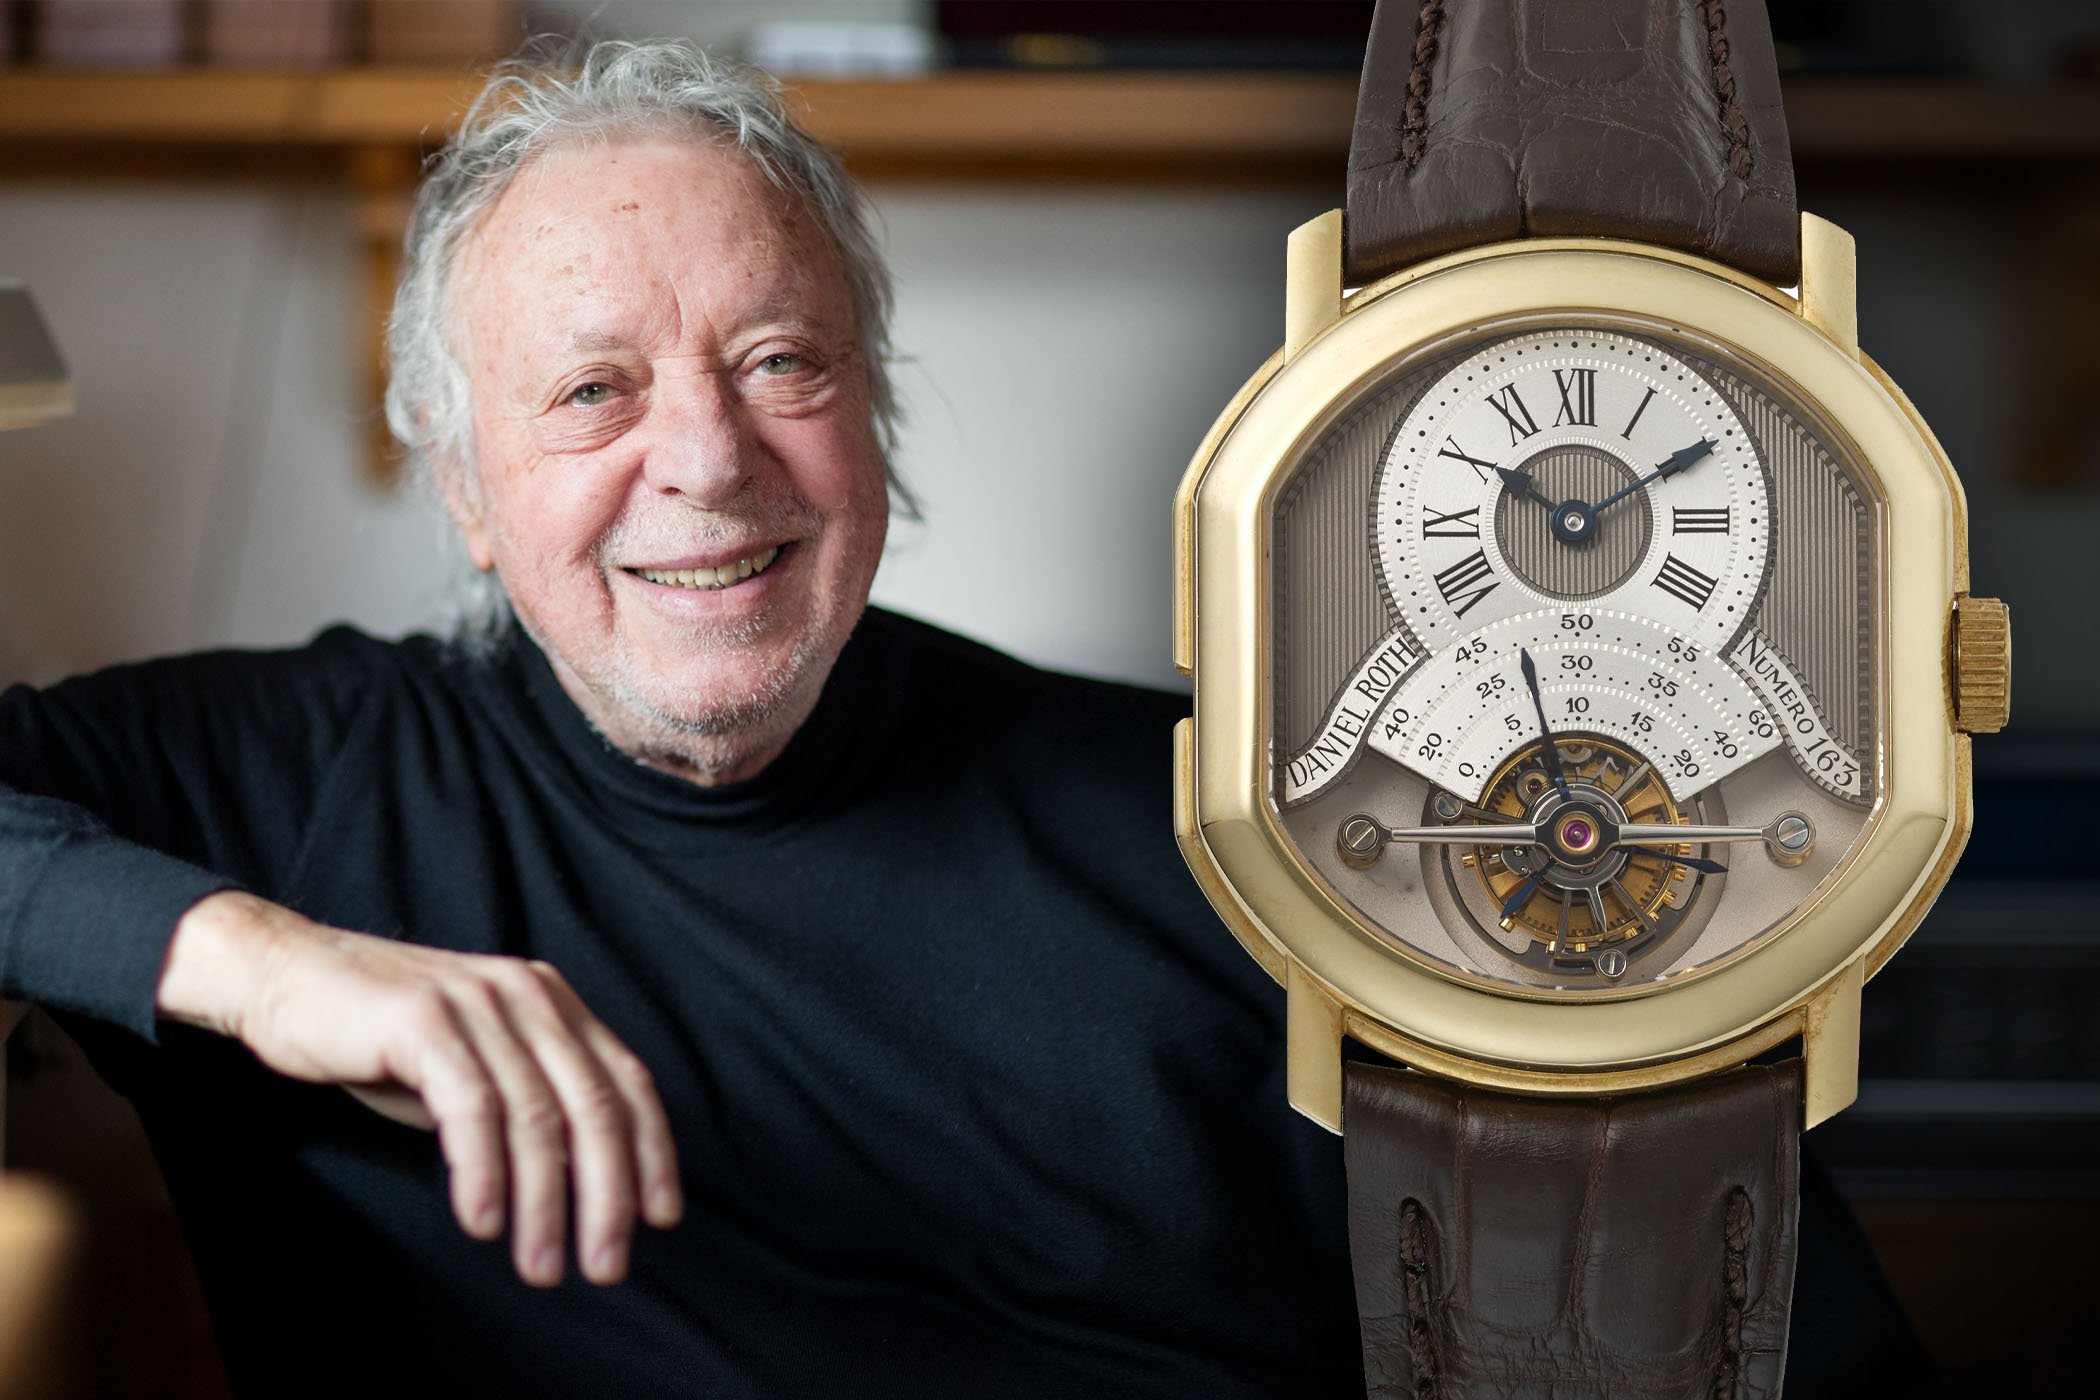 A Complete Collector's Guide to Daniel Roth and His Career from Breguet to Jean Daniel Nicolas